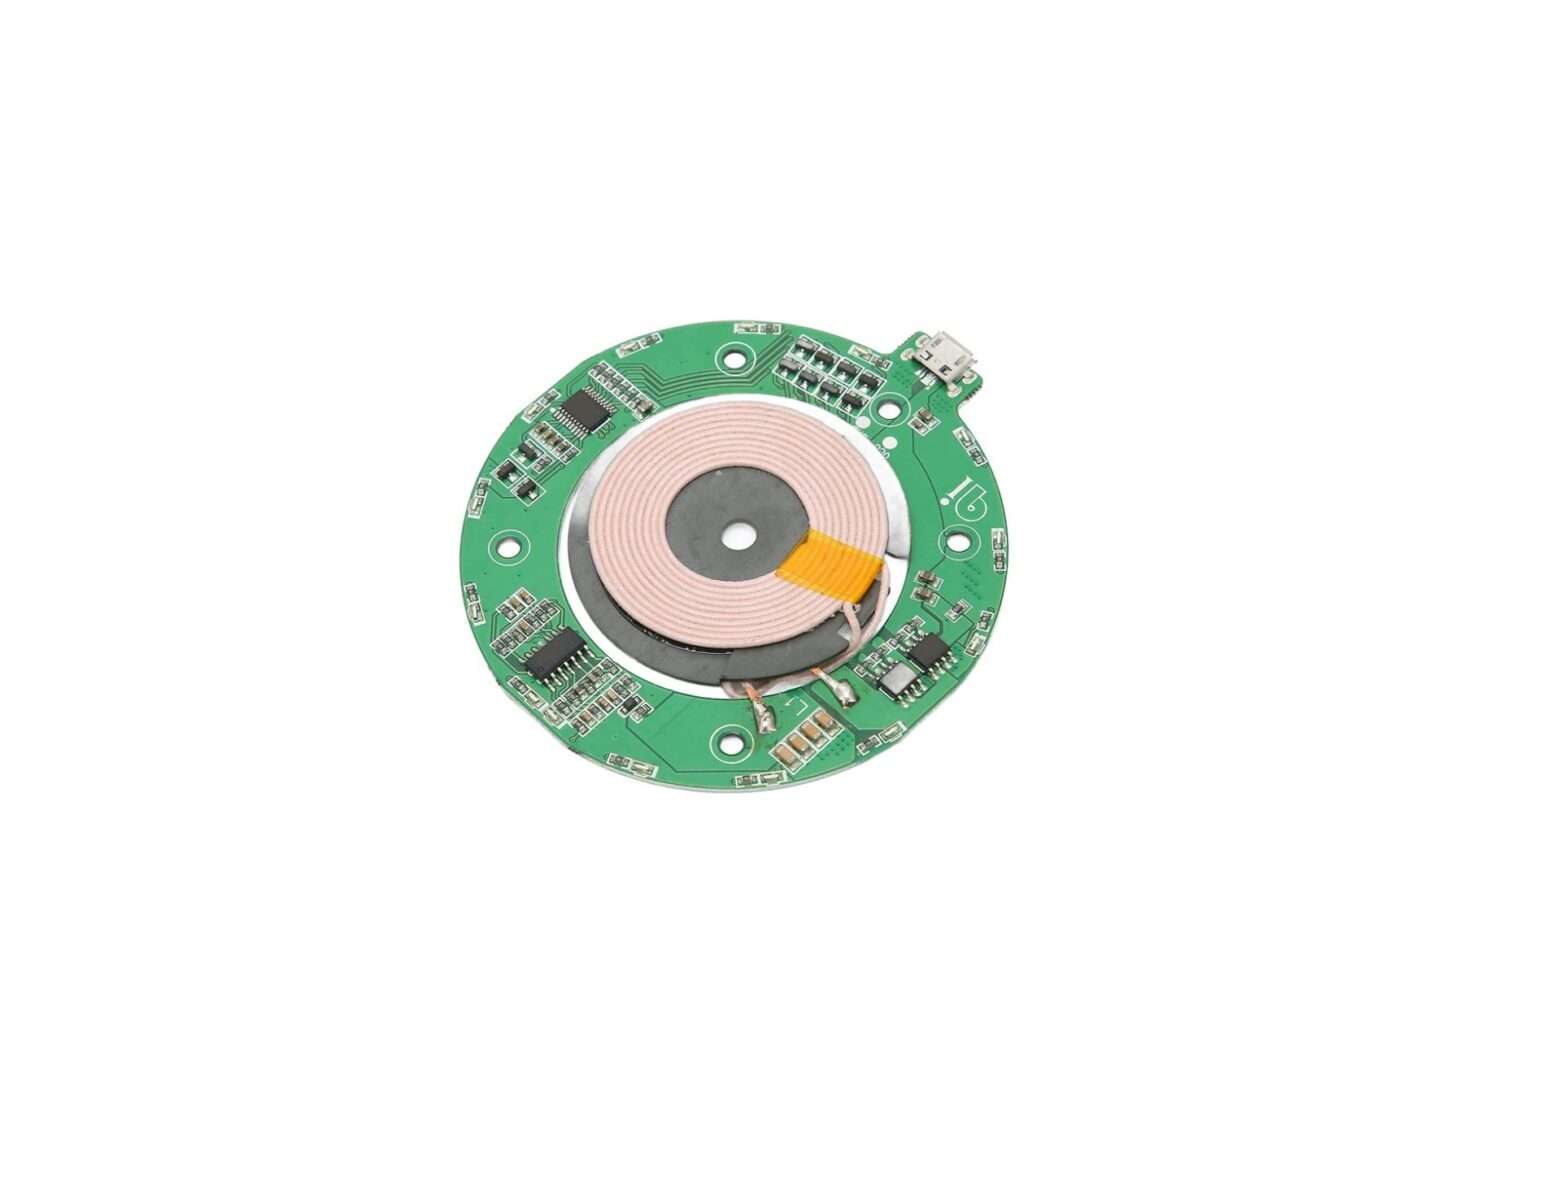 Bcs Automotive Interface Solutions WPC003-5 5W Wireless Charging Module TX Controller User Manual - Featured image